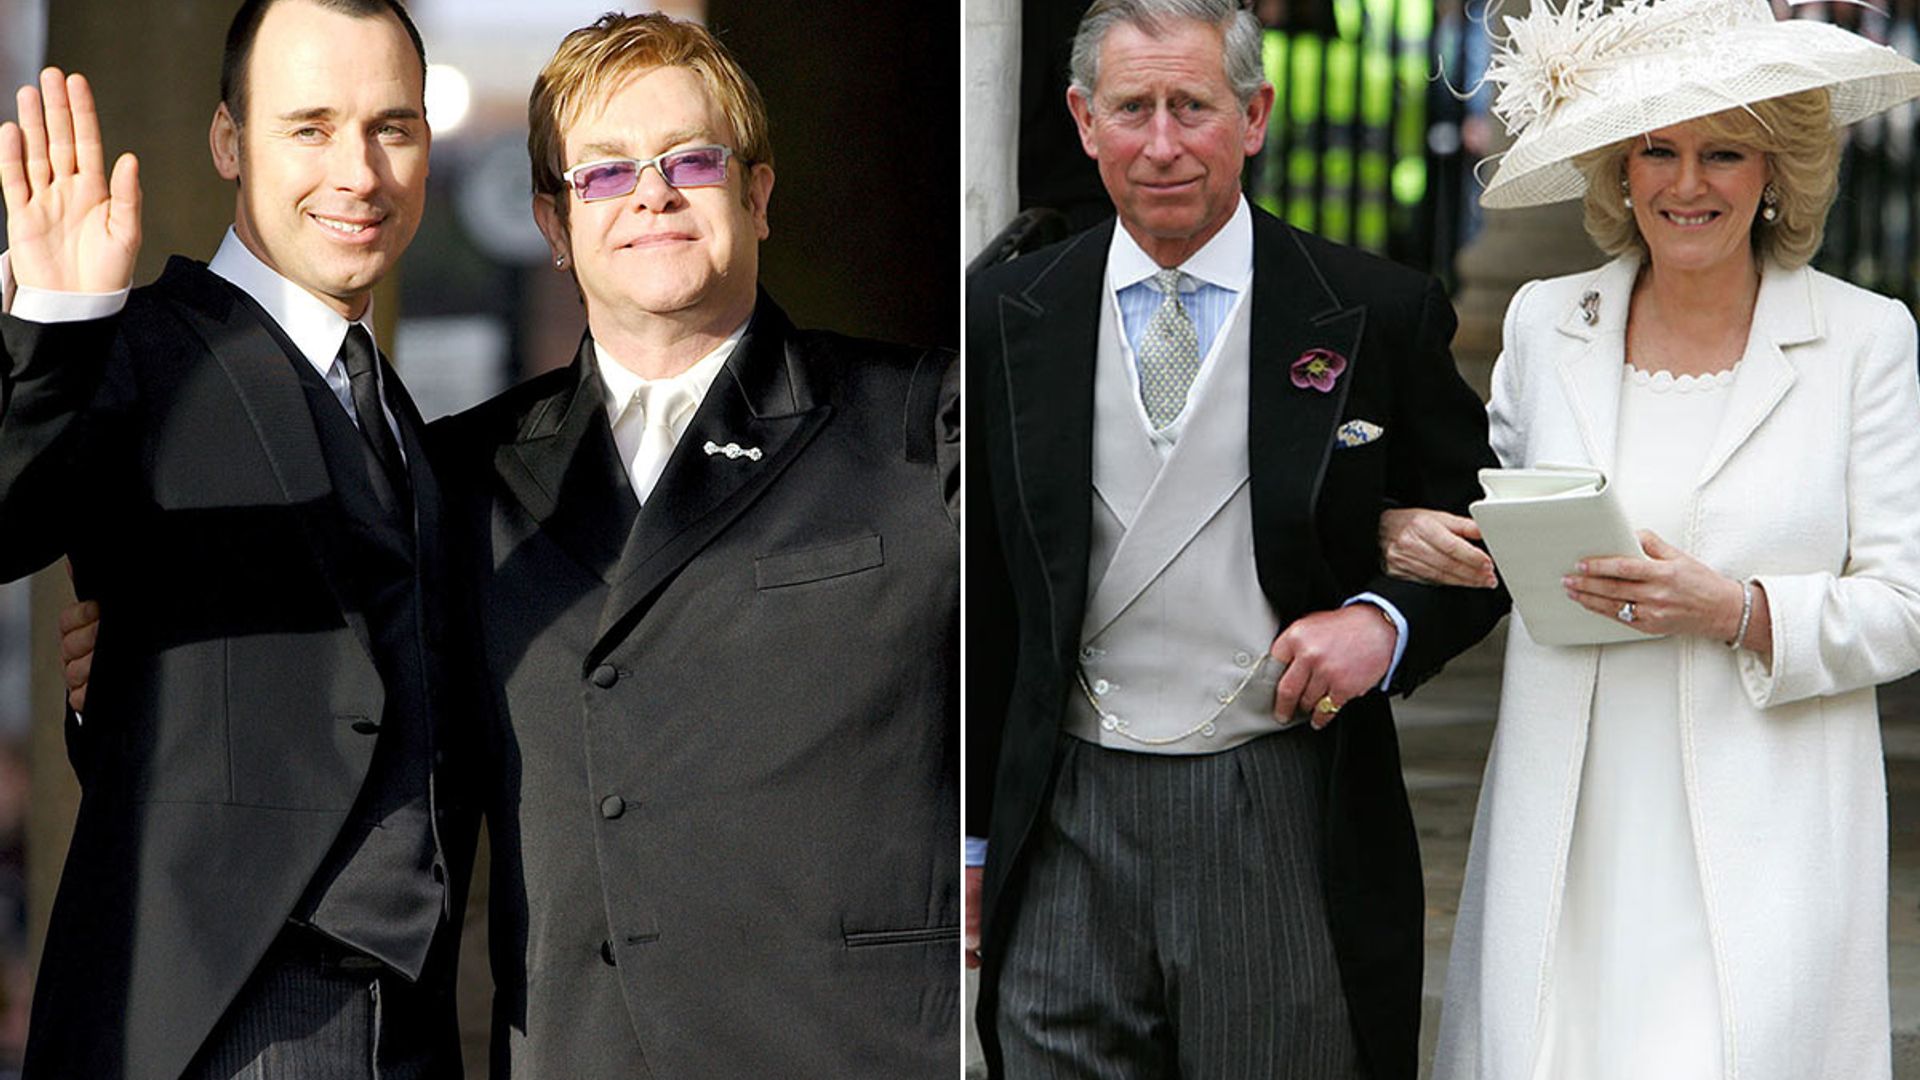 Elton John and David Furnish's sweet wedding connection to Prince Charles and Duchess Camilla